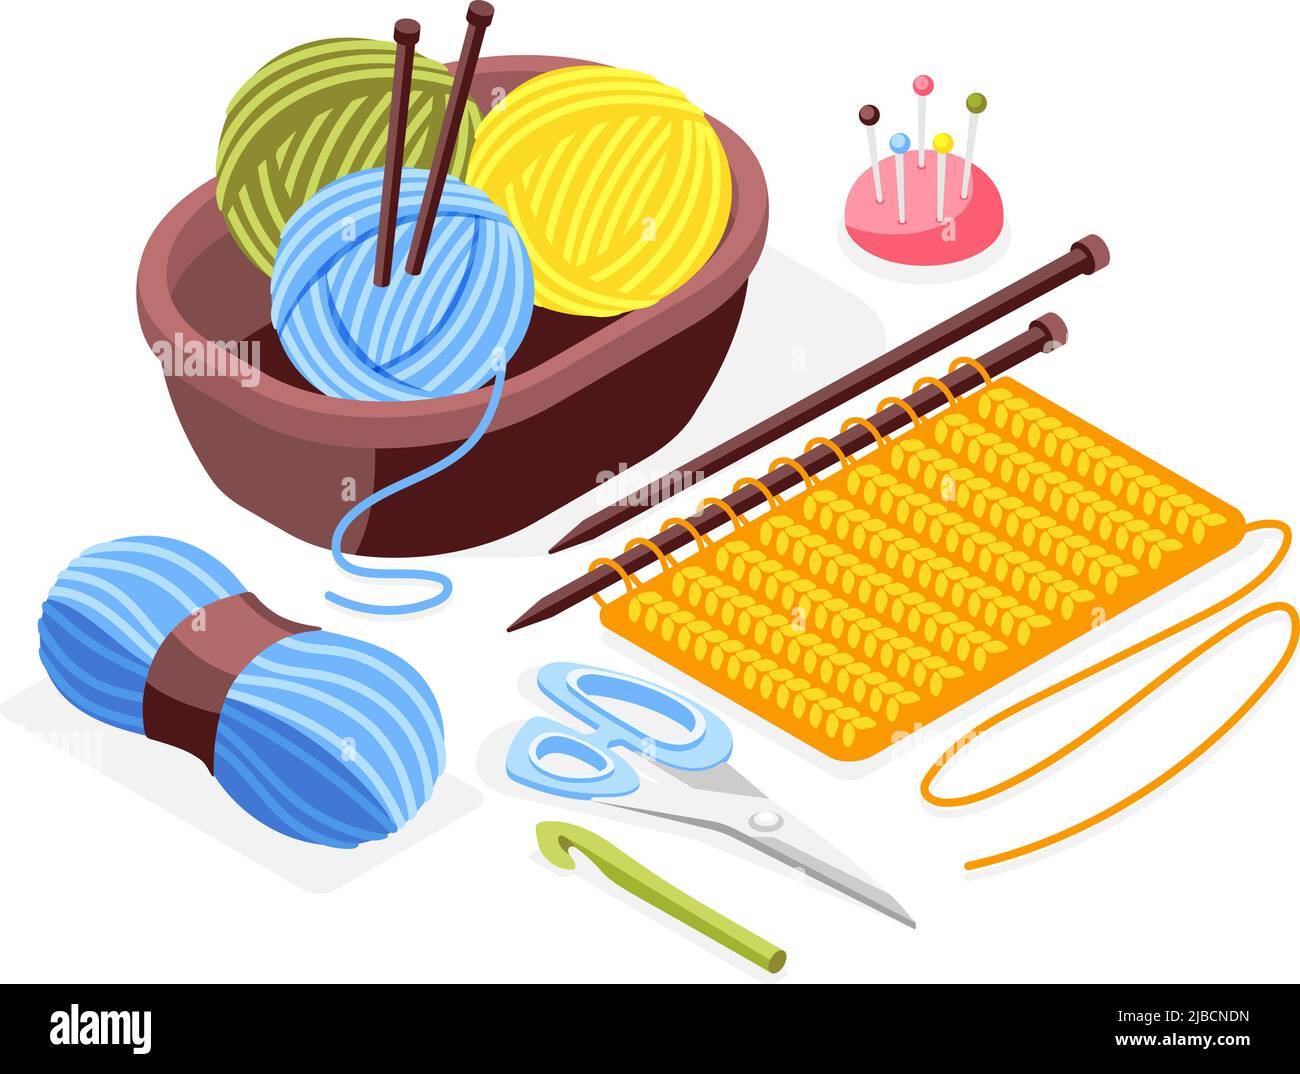 Hobby crafts isometric background with knitting needles scissors piece ...